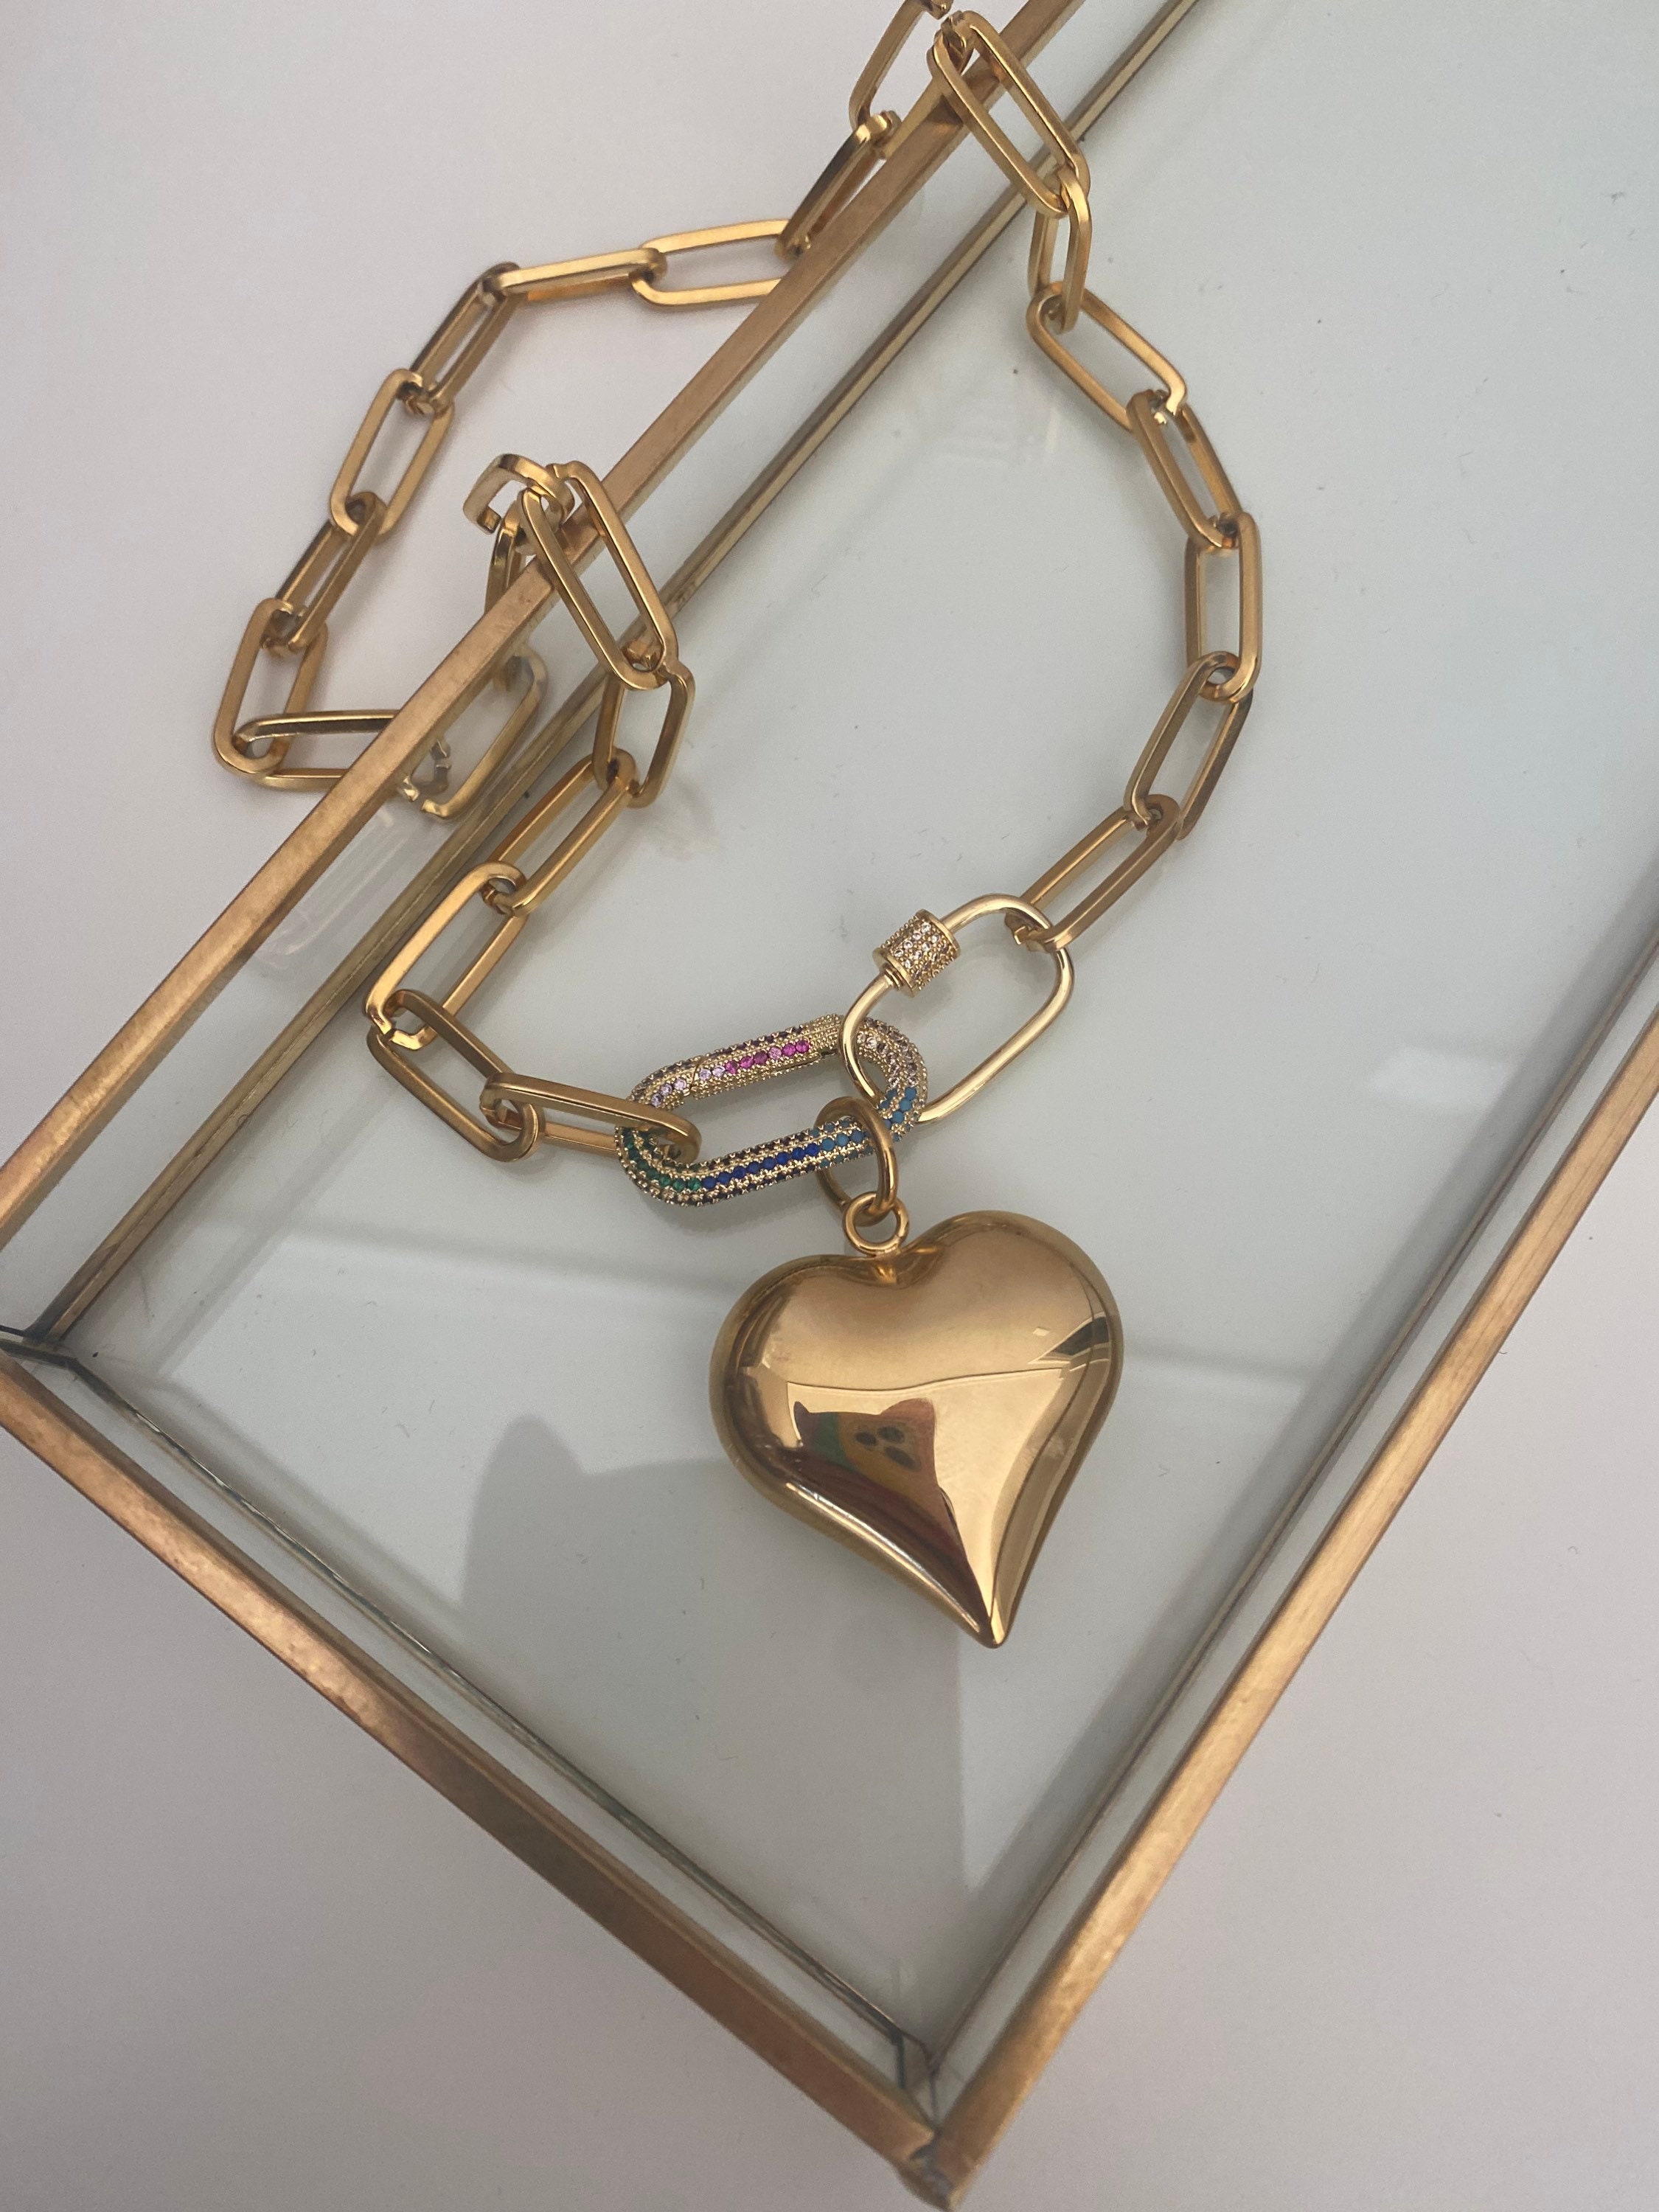 14Kt Real Gold Heart Charm Necklace With Paper Clip Chain – Assay Jewelers